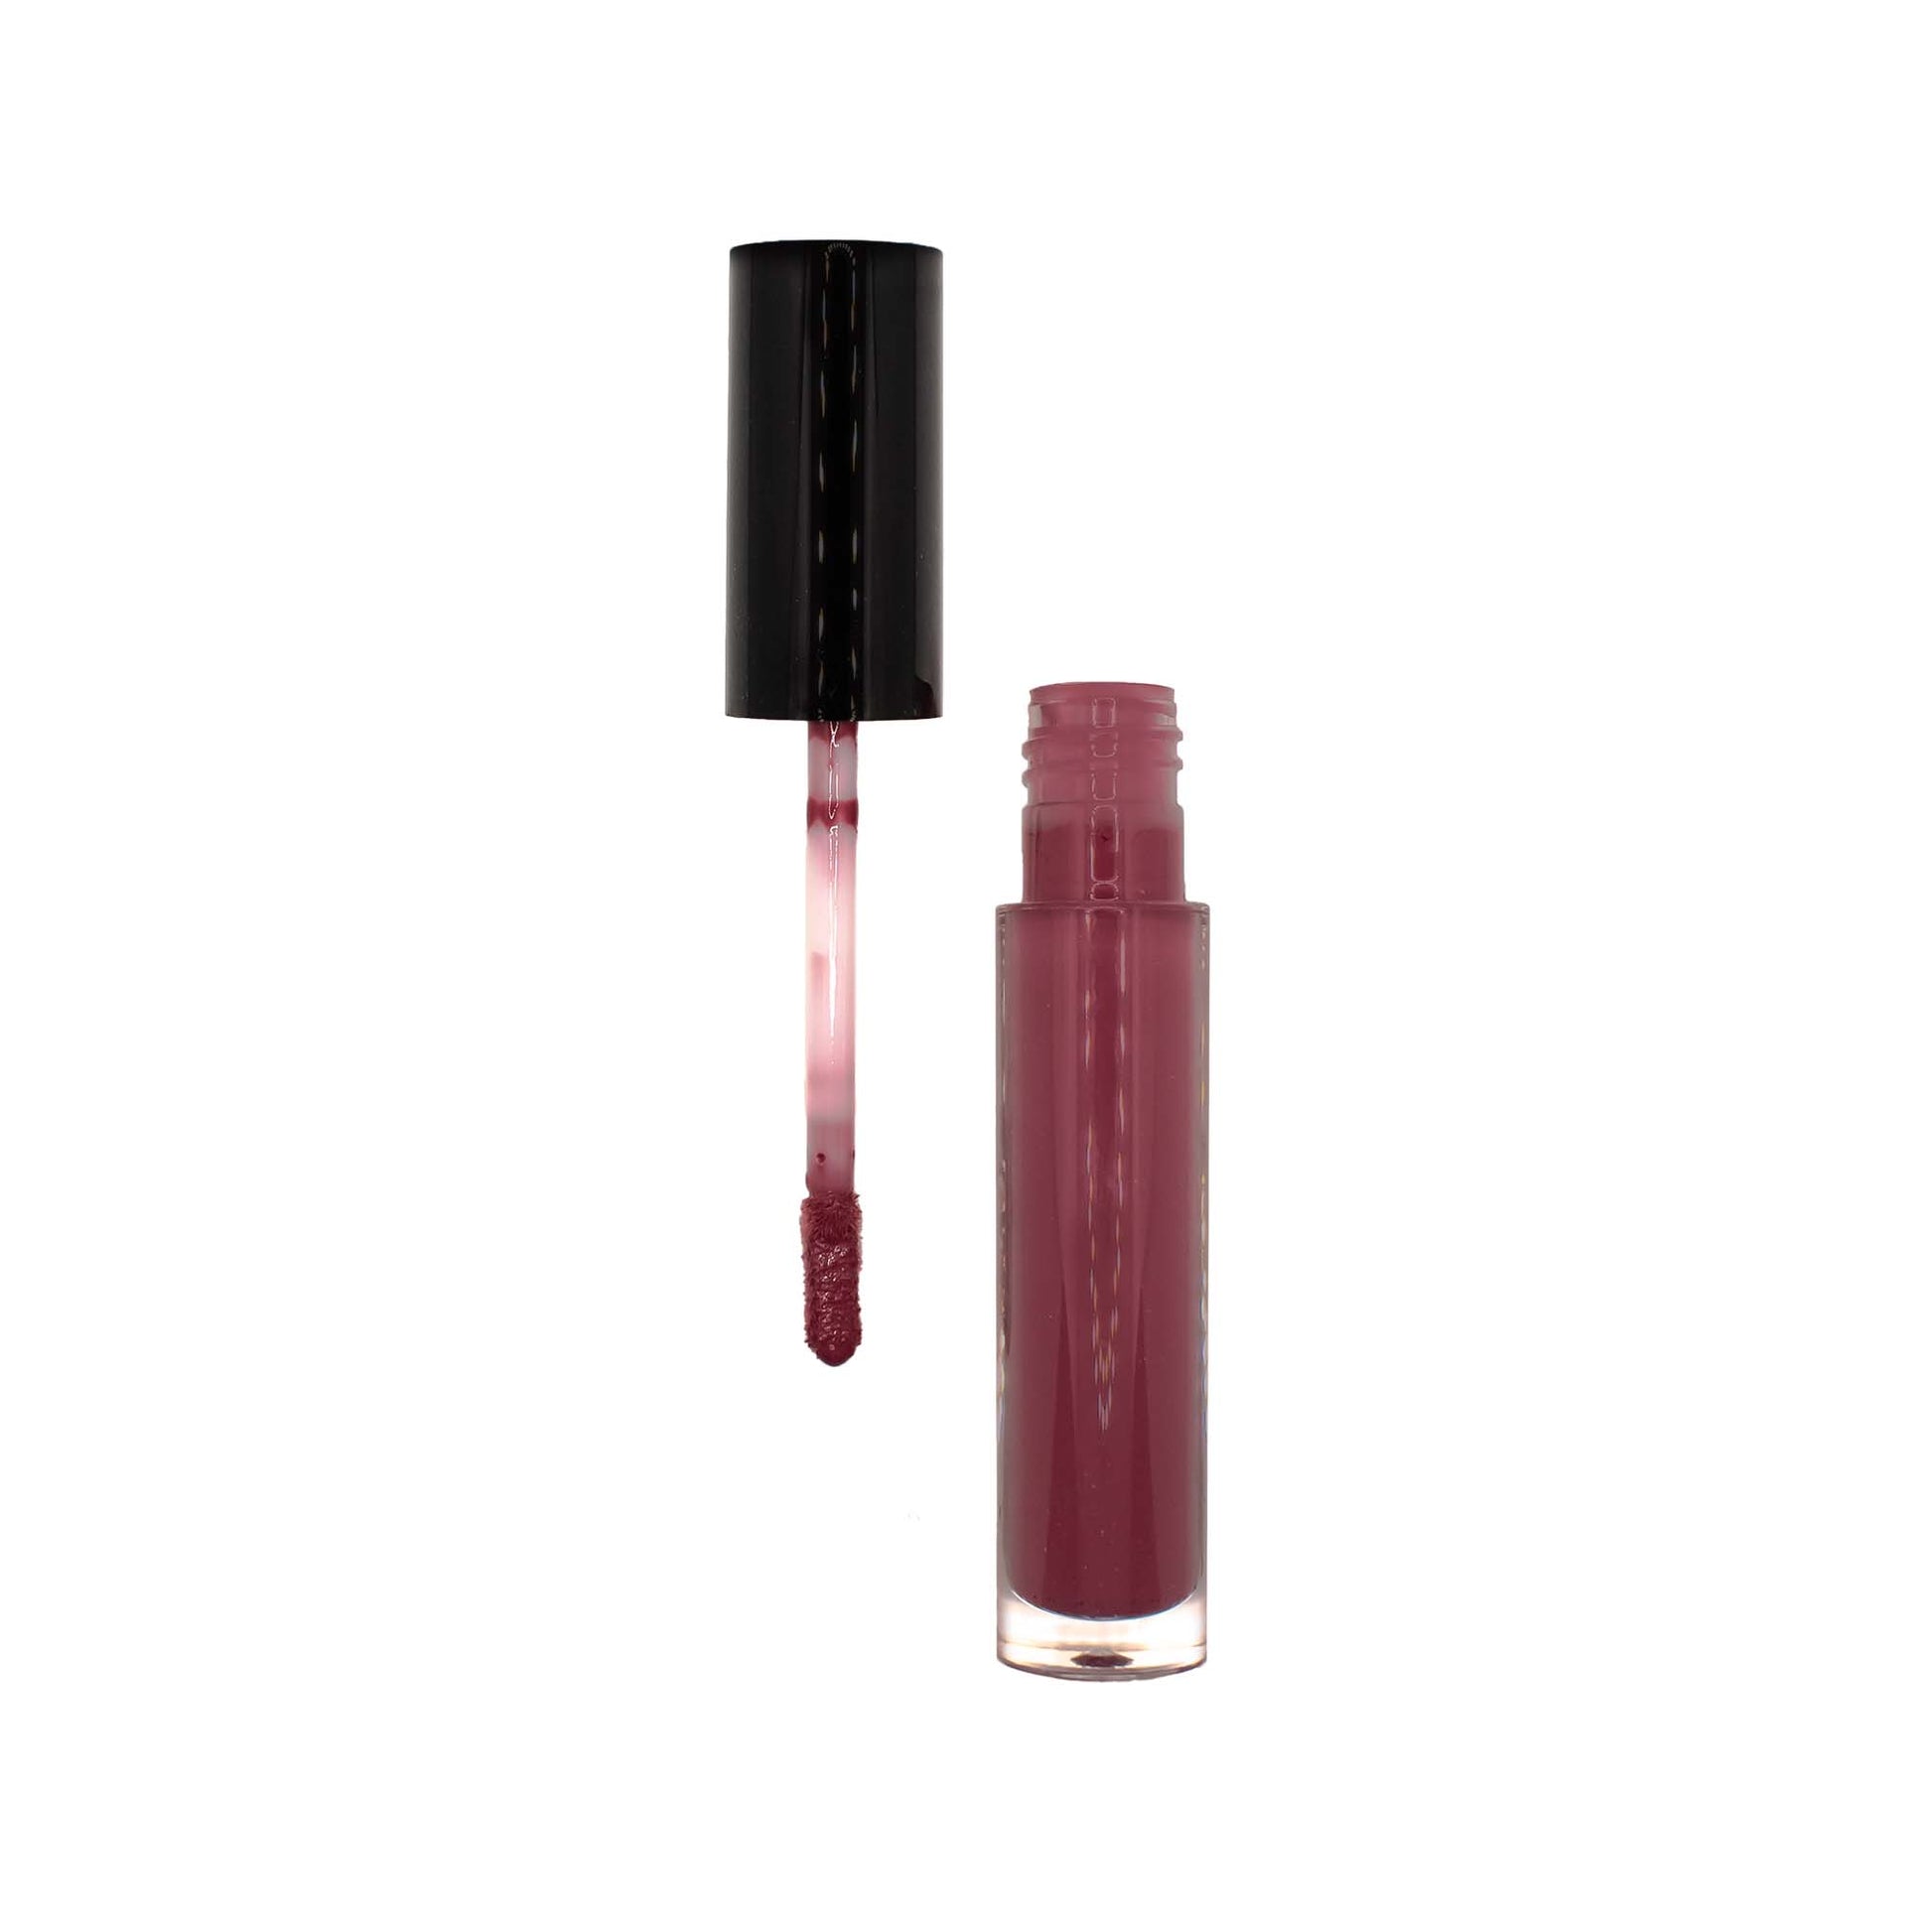 Elevate your lip game with Cruisin Organics Brick Lip Gloss in Warm Red. This highly pigmented liquid gloss adds a glossy finish and intense color to your pout. With a wide range of shades, you can find the perfect match for your unique style. (Pucker up and add a pop of pigment to your lips with this bold and vibrant lip gloss!)